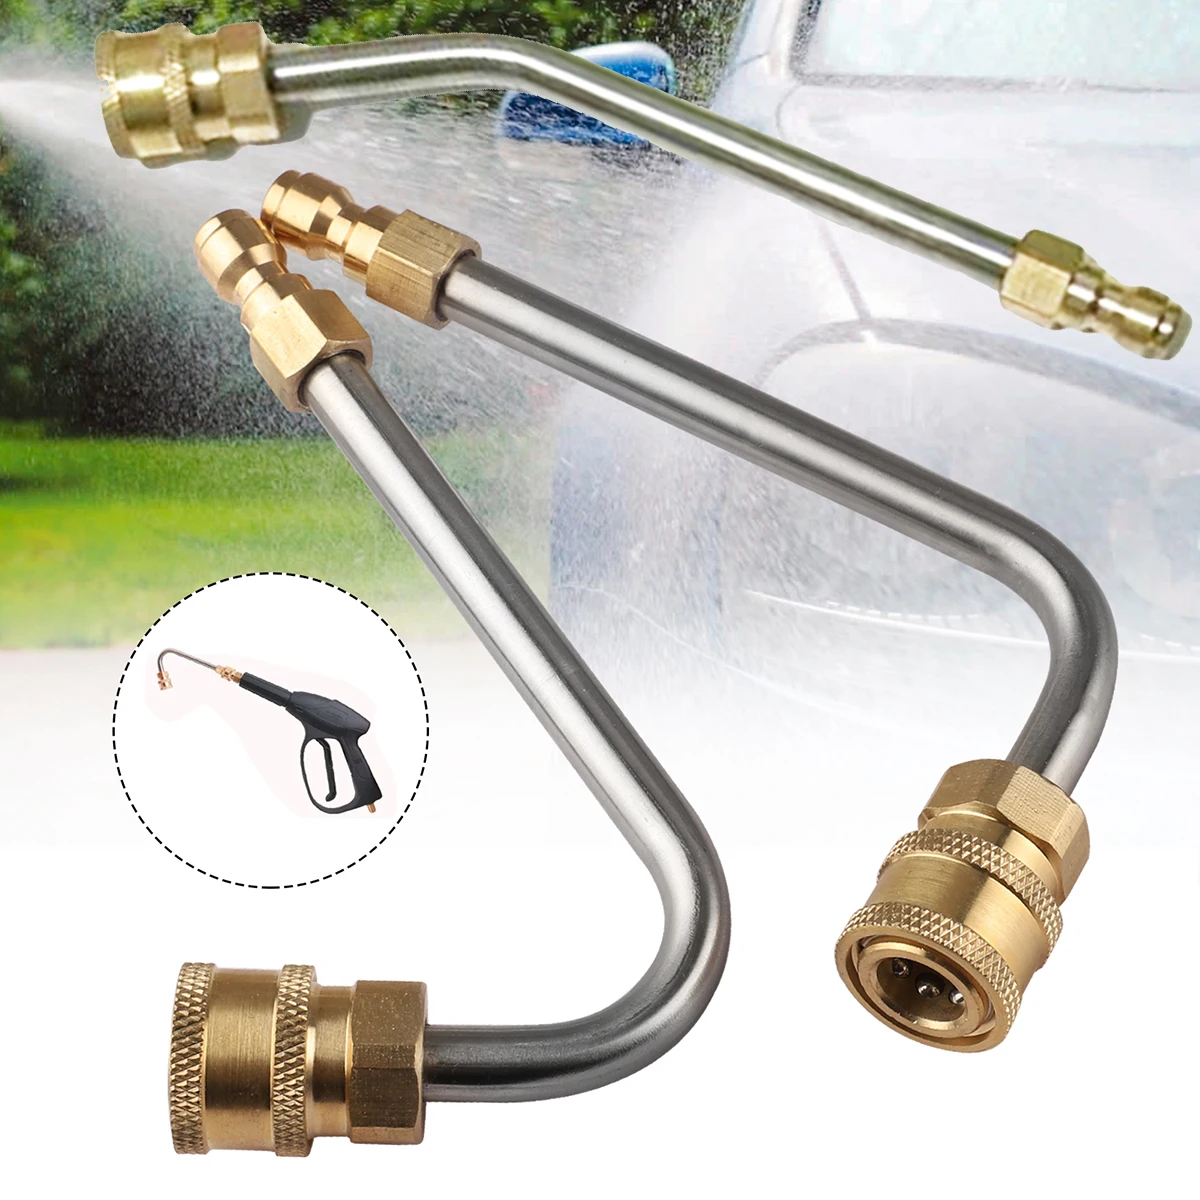 Multipurpose Automobile Car Washing Cleaning Maintenance tegongse High Pressure Power Car Washer Extension Rod 